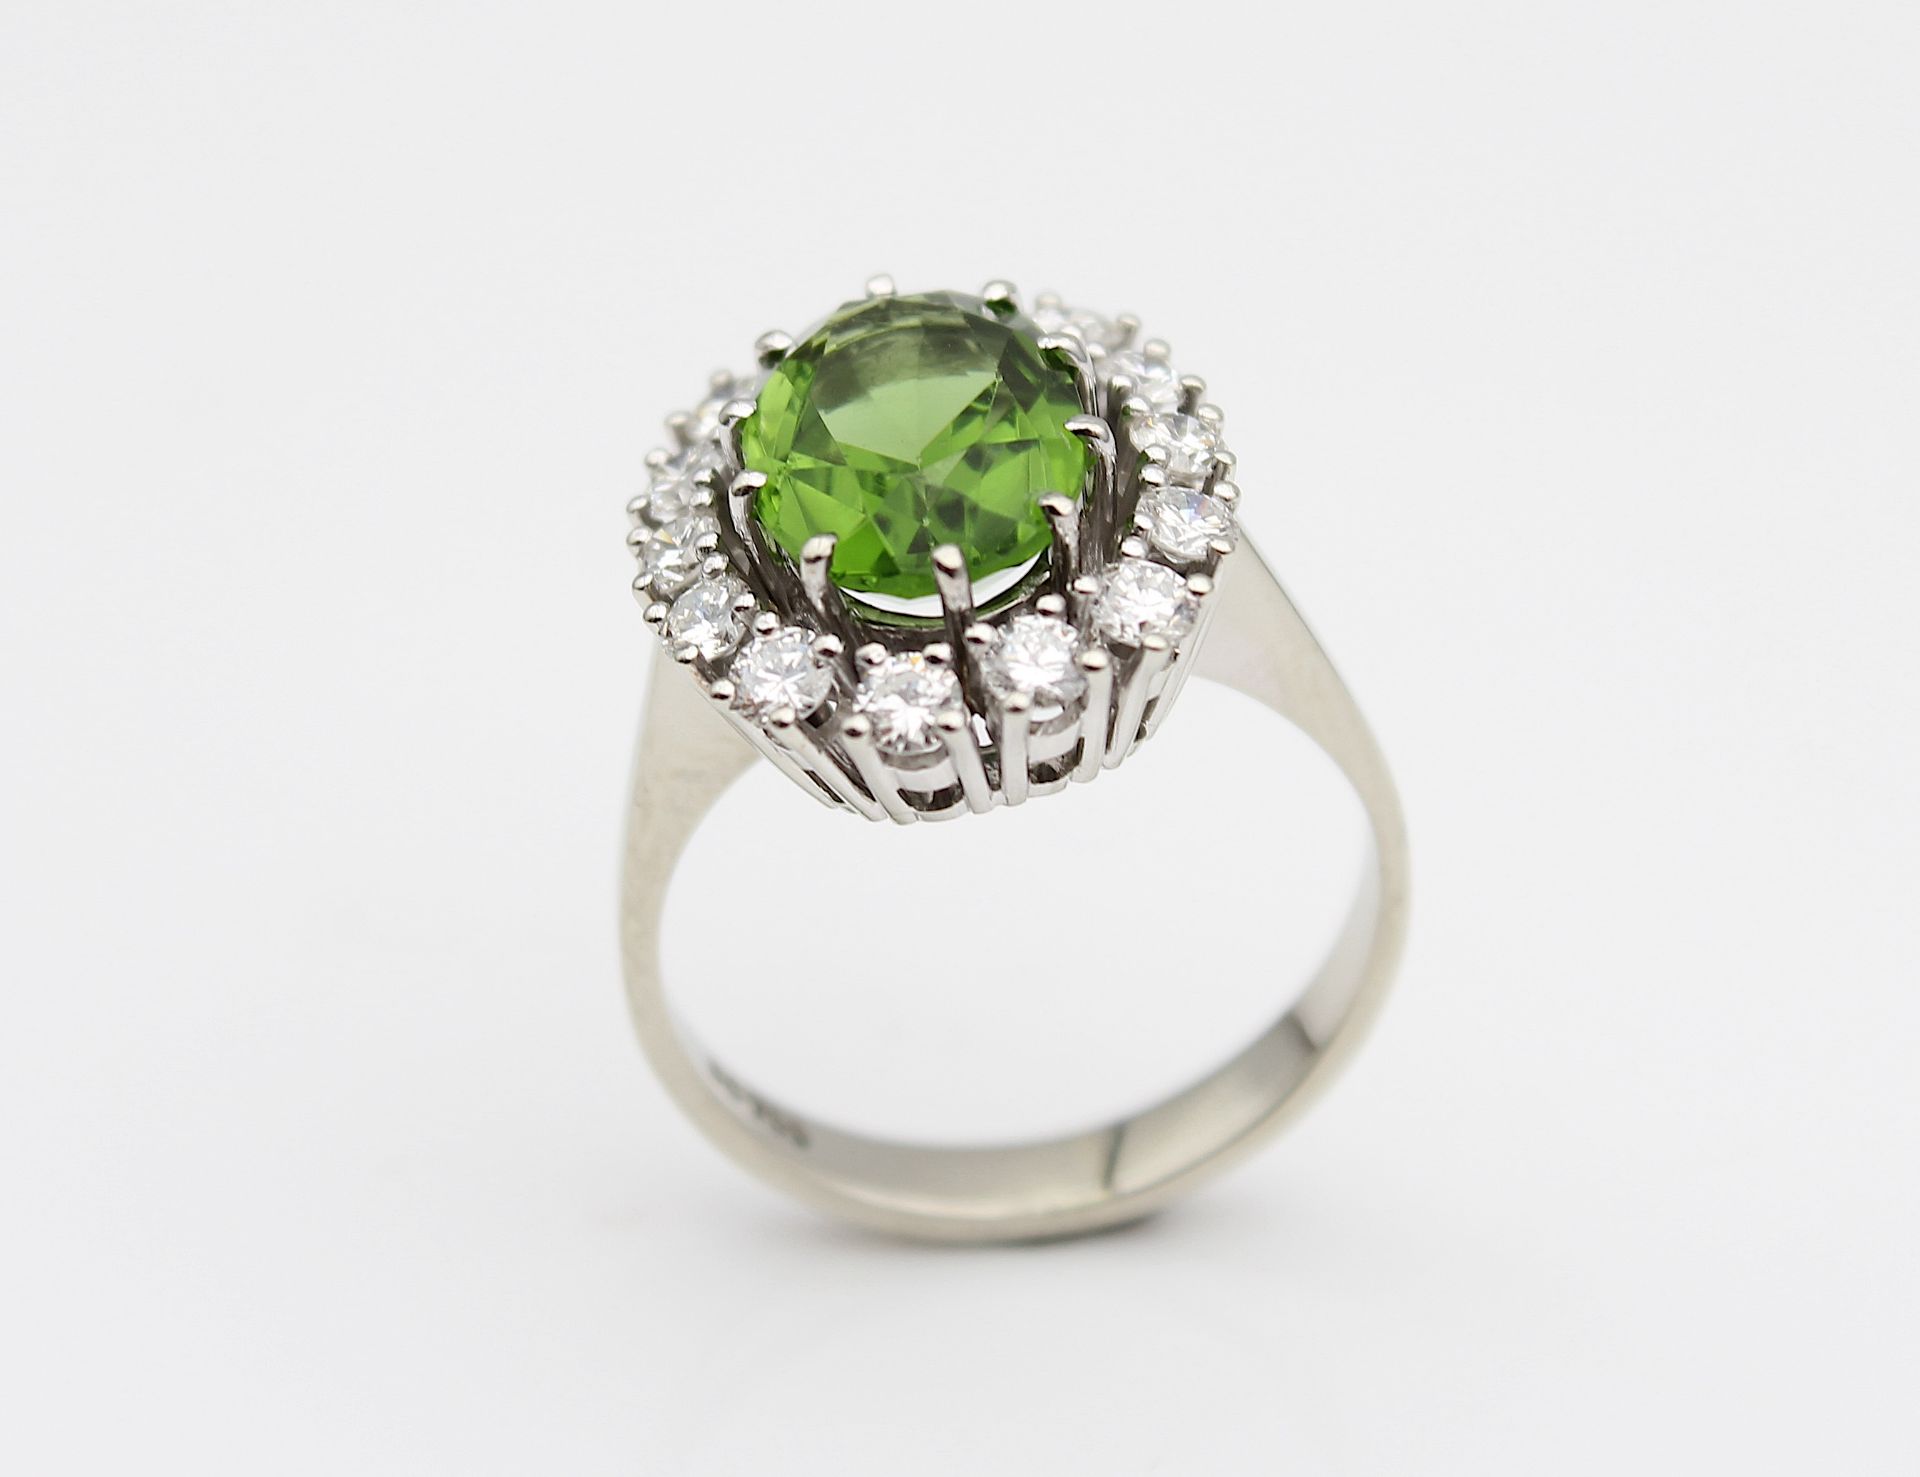 Jewel style ring with brilliants - Image 2 of 4